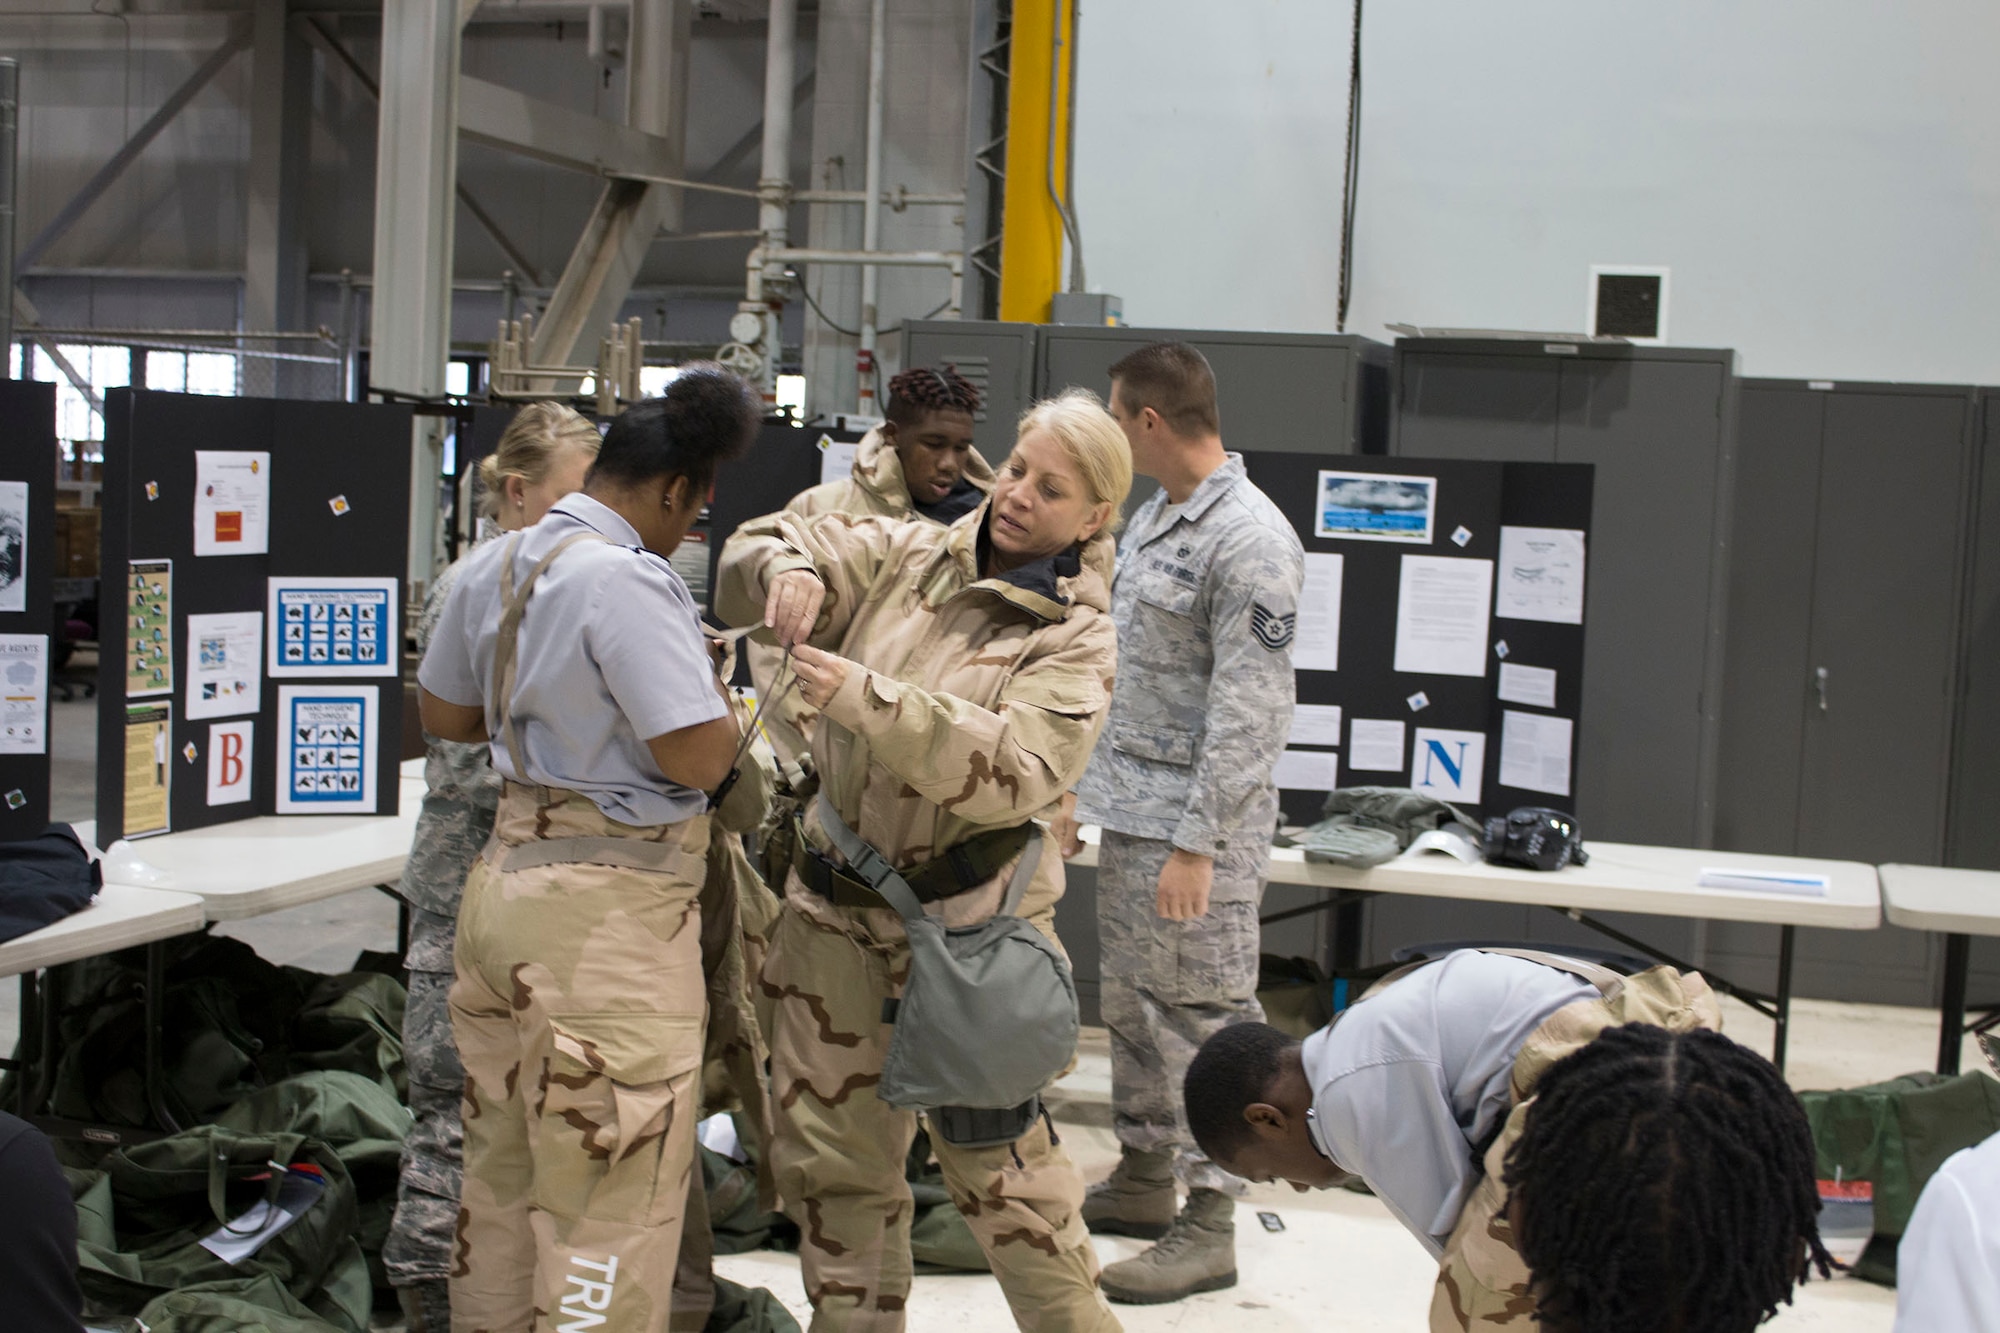 Tech. Sgt. Kathleen Wyatt, 445th Civil Engineer Squadron wing emergency manager, helps a Meadowdale High School student don a chemical warfare suit.